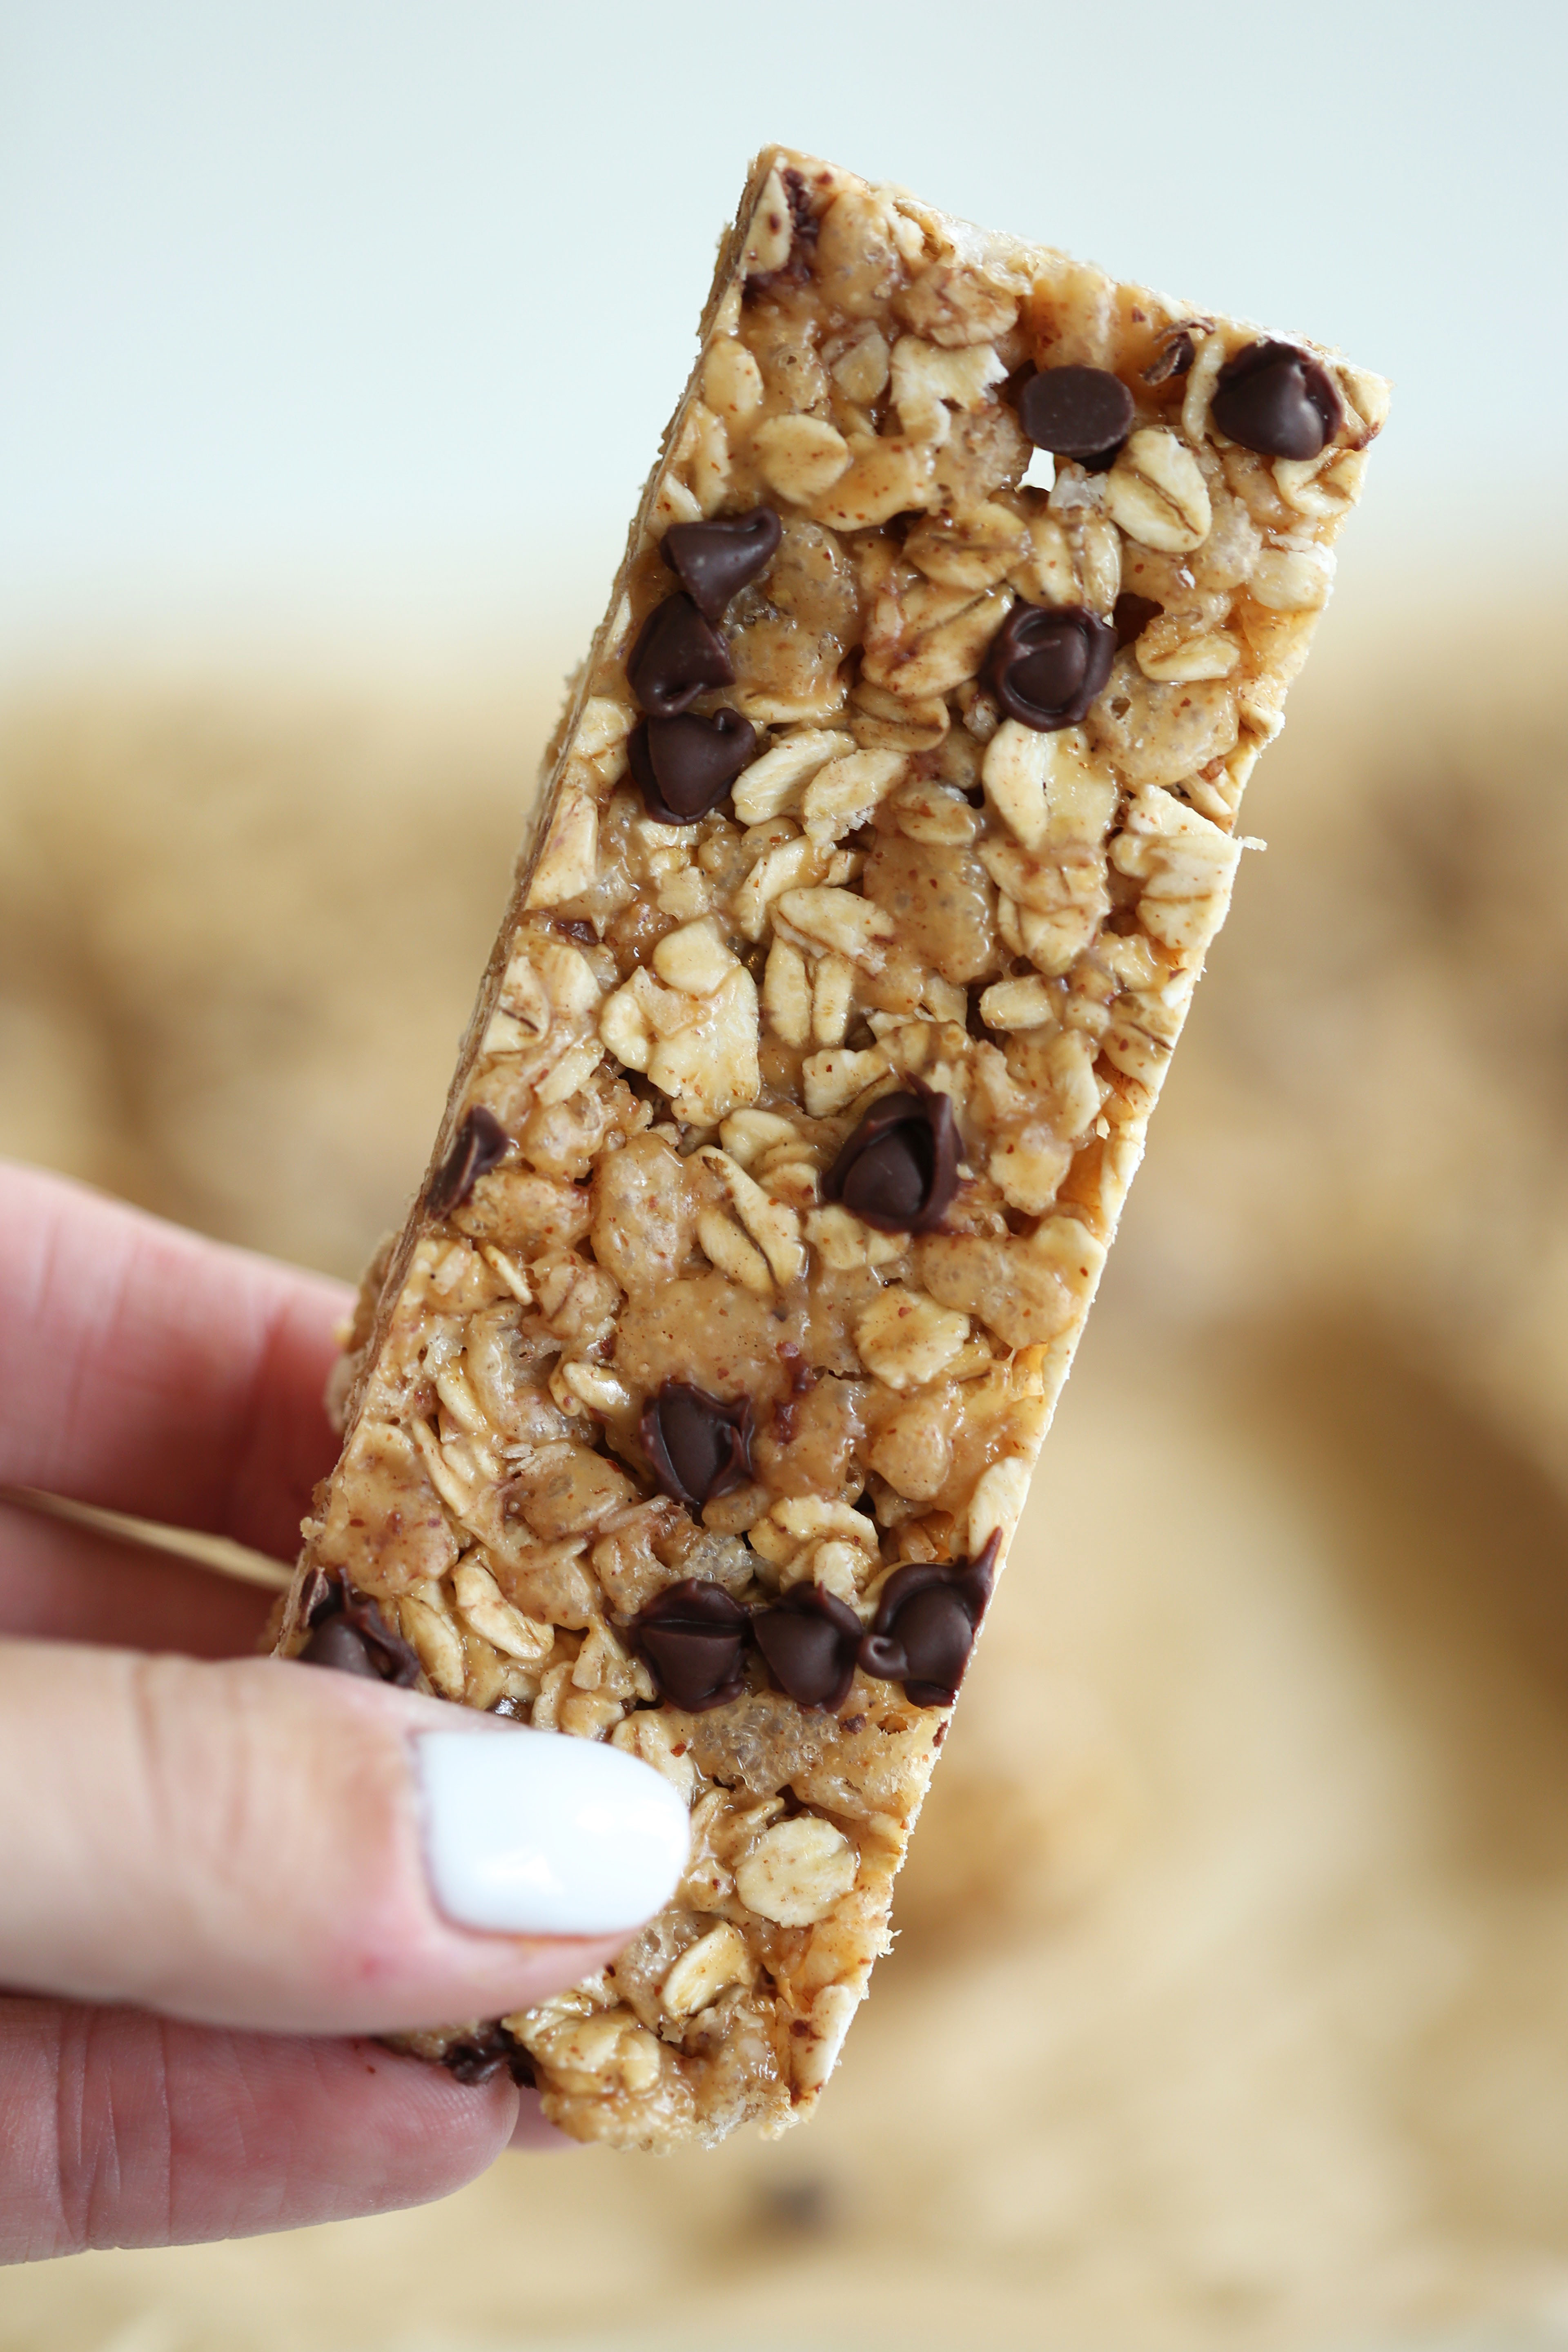 These No Bake Almond Butter Granola Bars are healthy, delicious and can easily be made in just 15 minutes! Perfect to grab on-the-go in the mornings too!